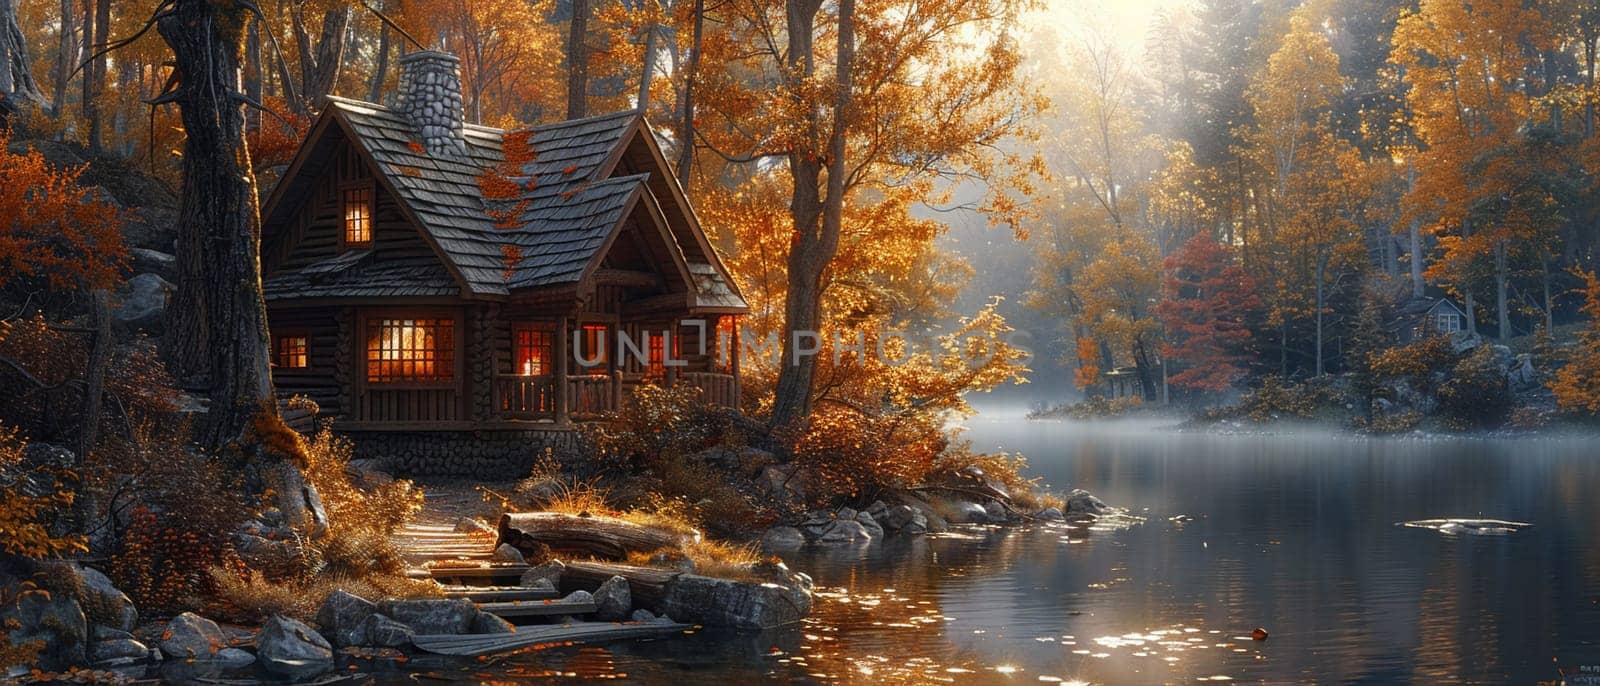 Rustic cabin in the woods depicted with a Thomas Kincade-like focus on light and idyllic settings